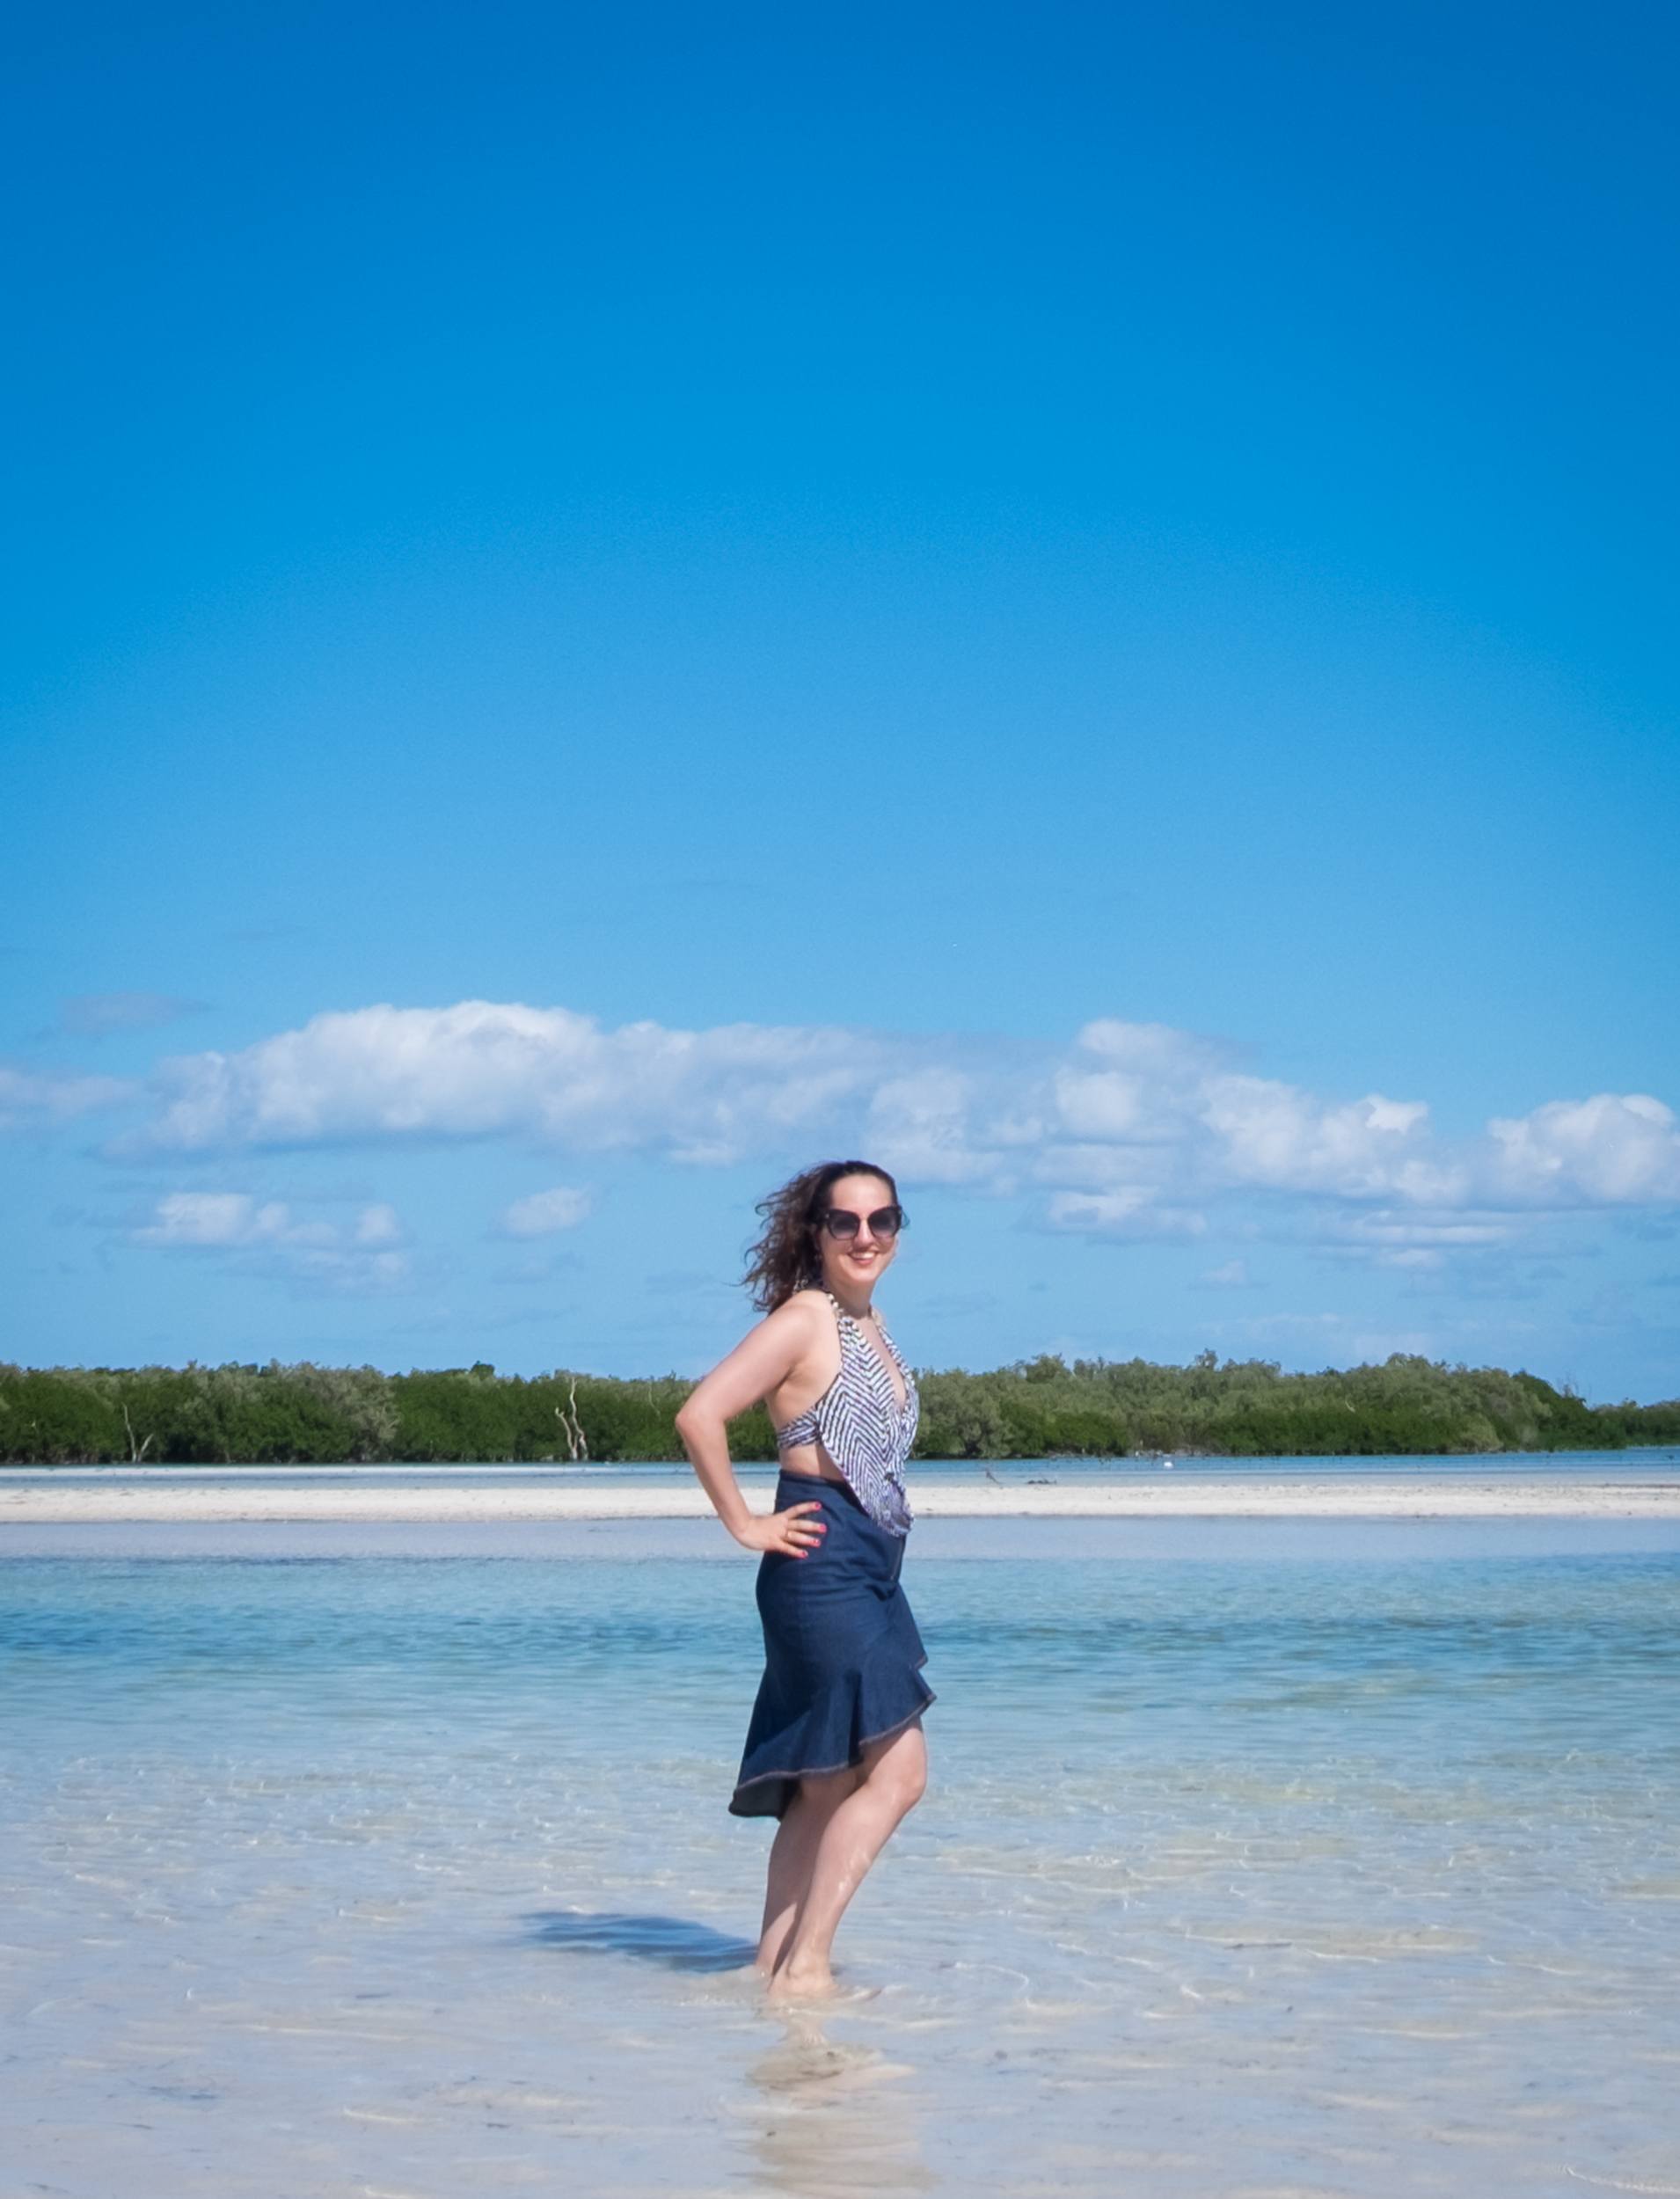 Kate standing in shallow water.